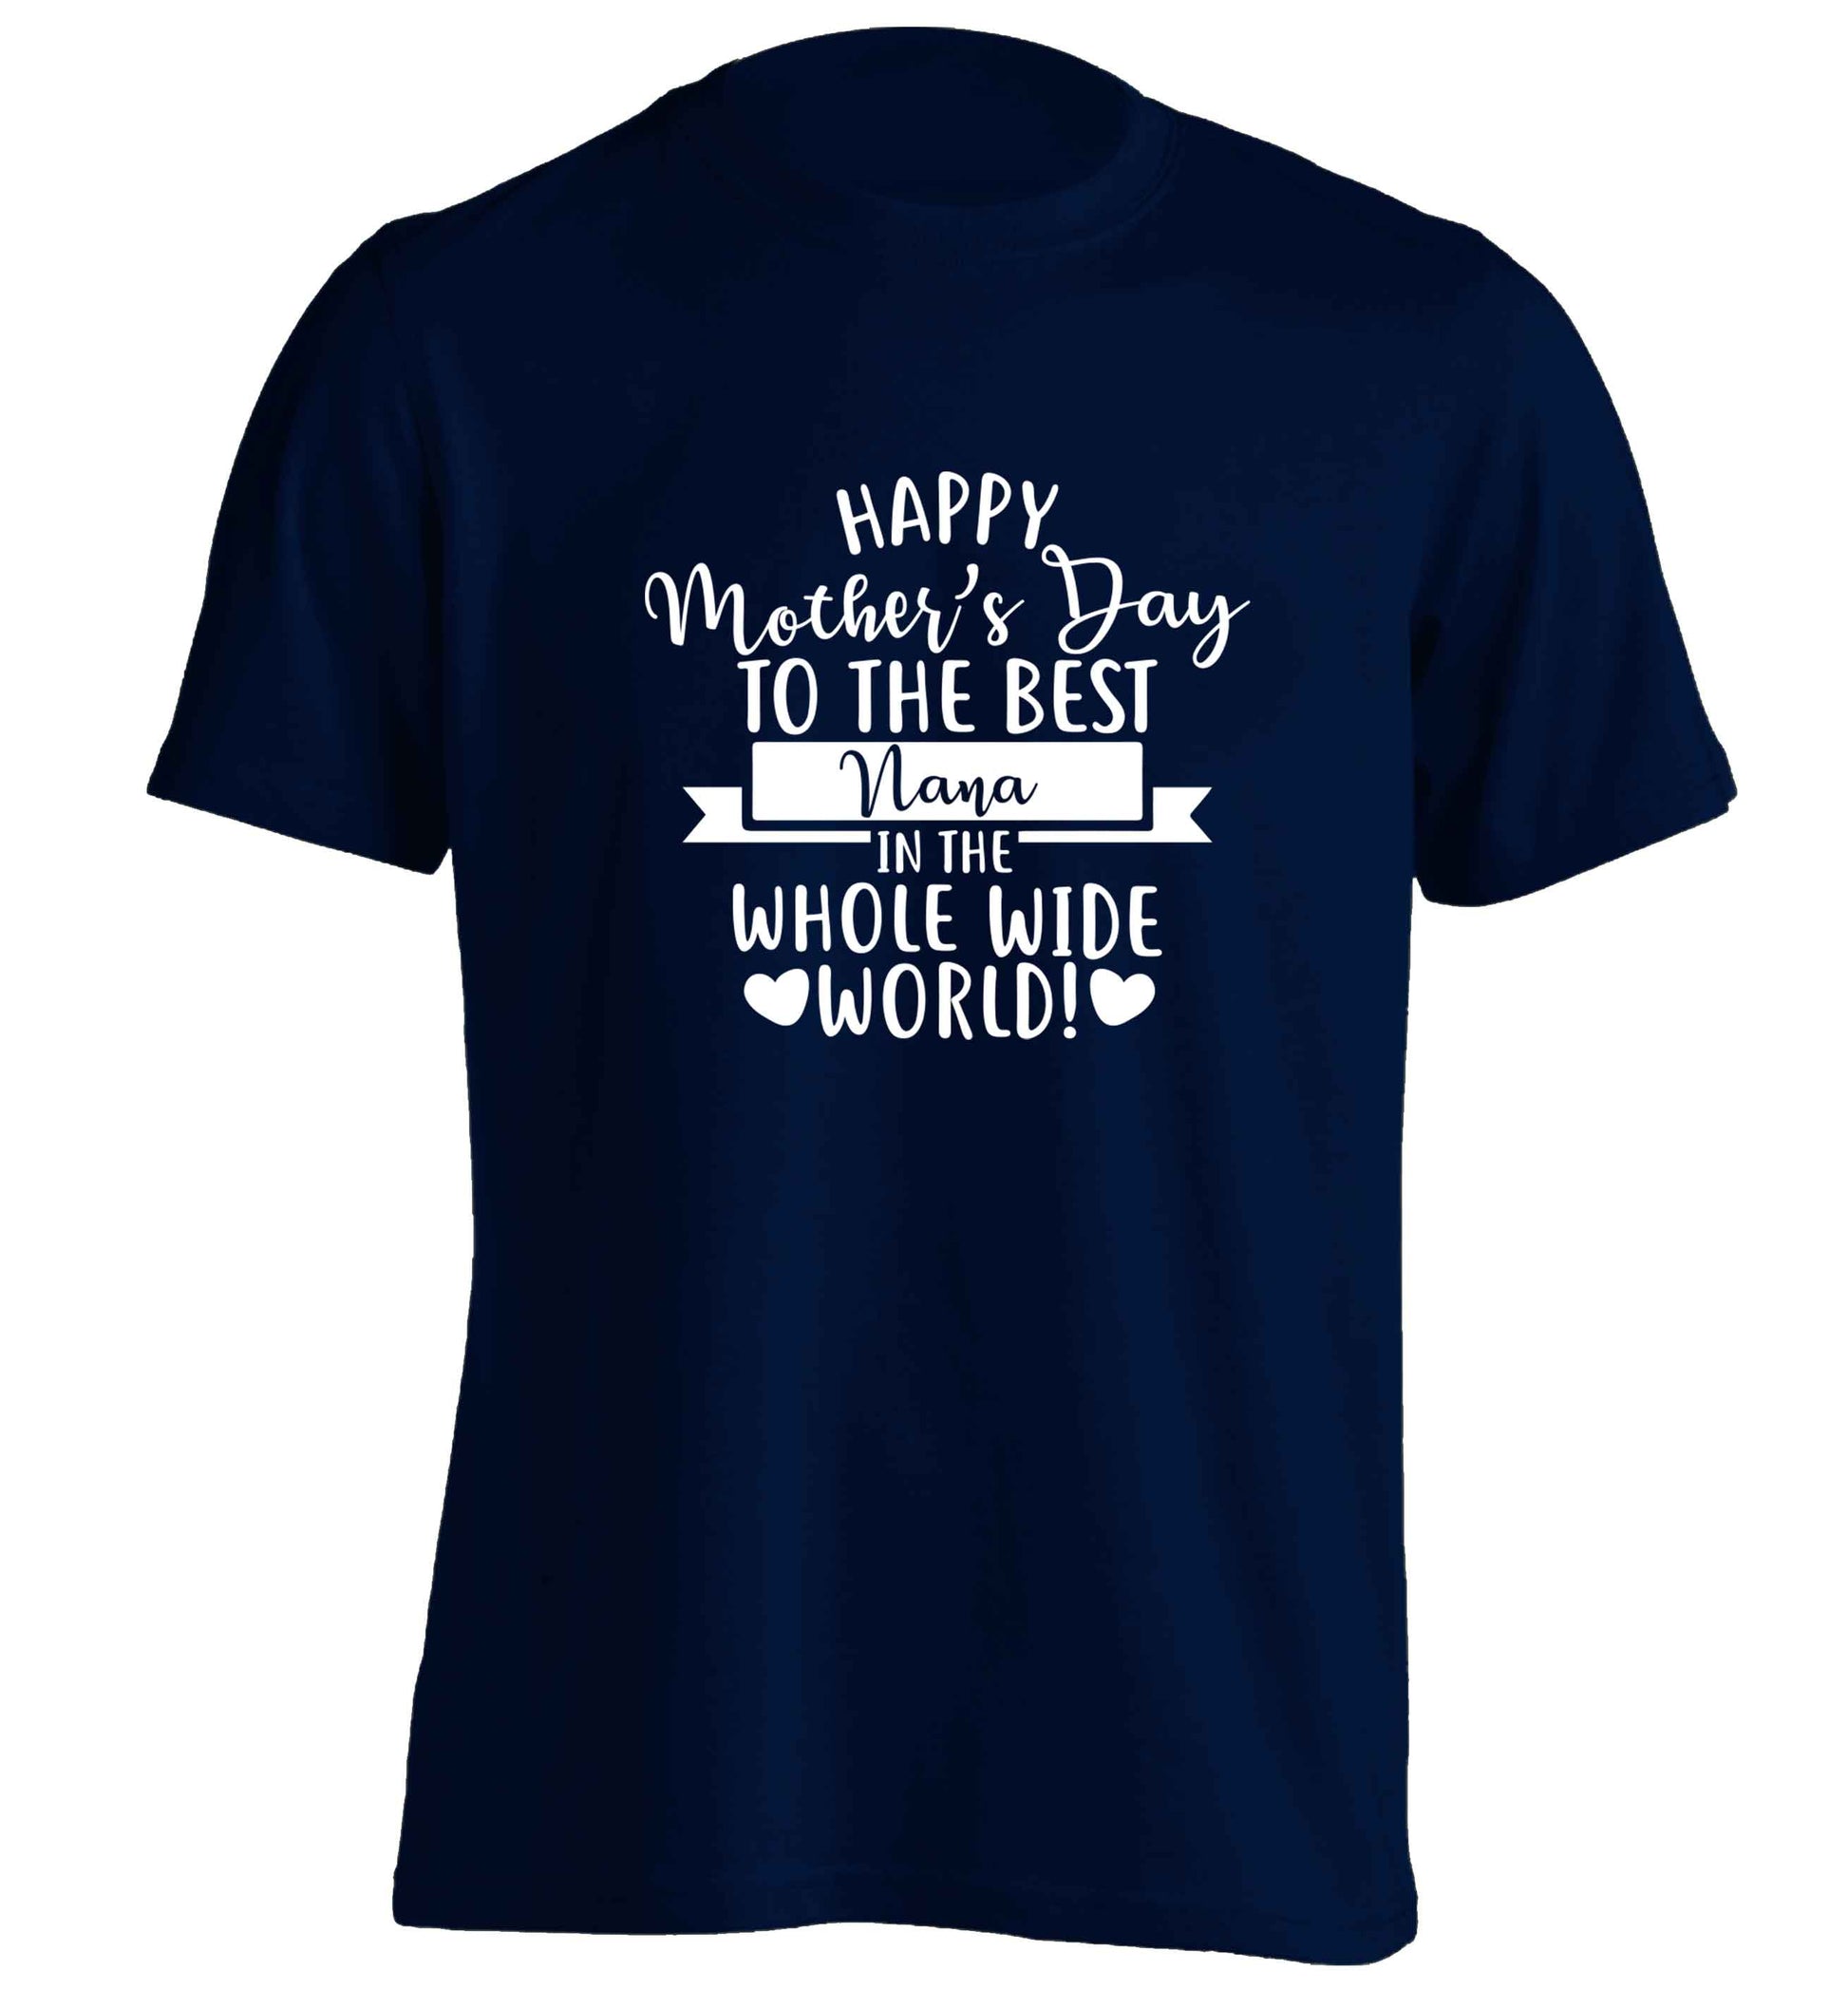 Happy mother's day to the best nana in the world adults unisex navy Tshirt 2XL